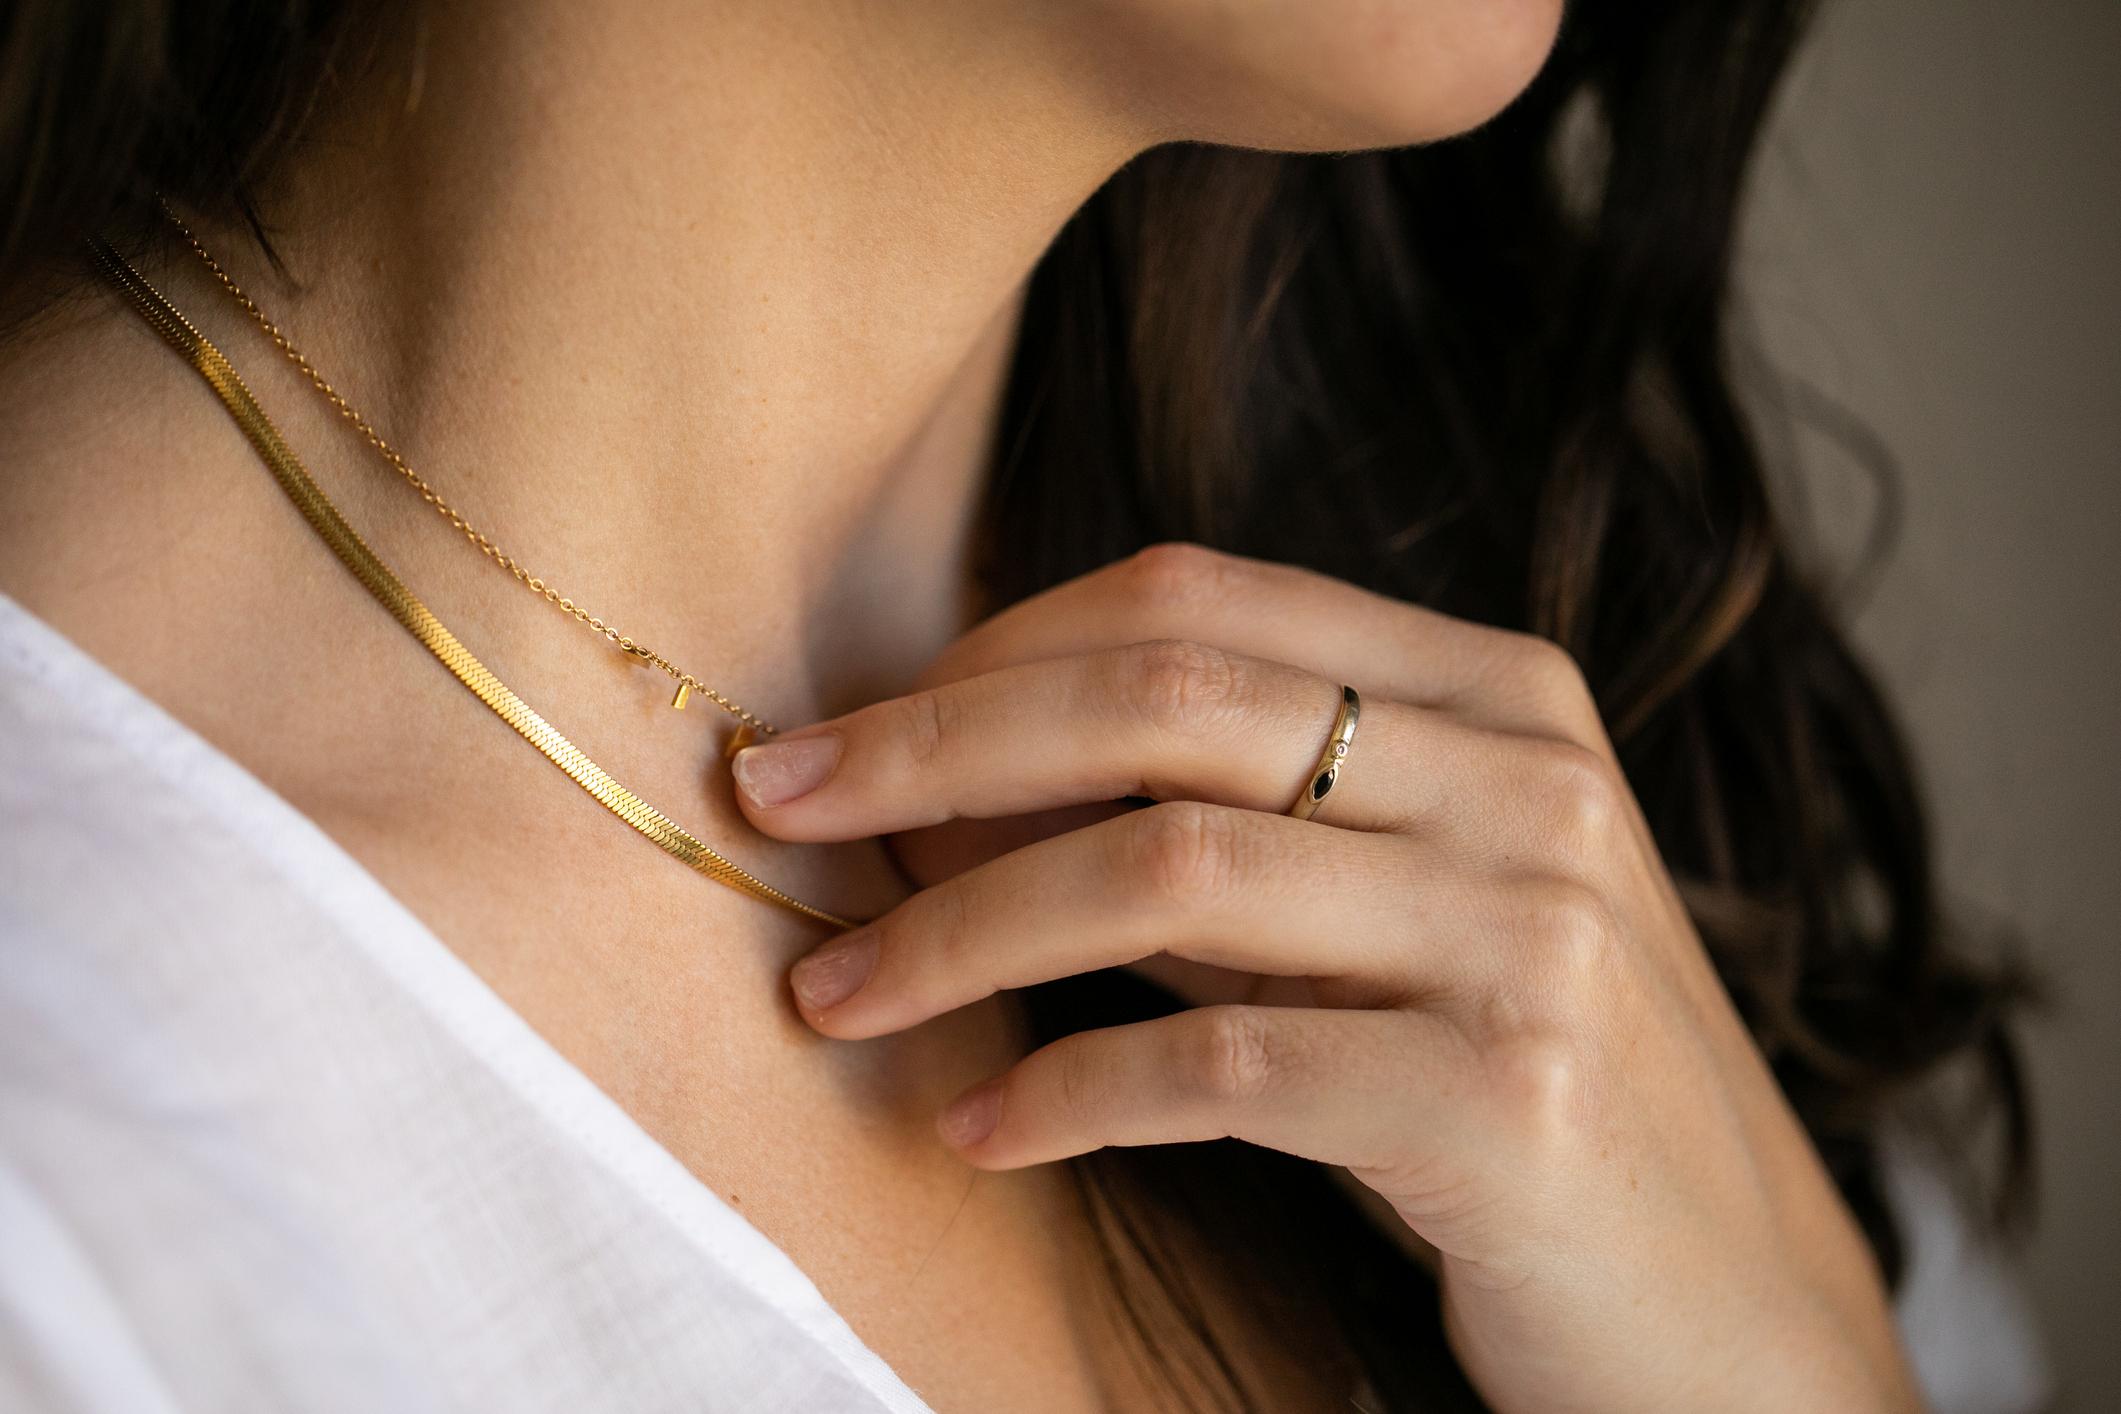  A close up of a woman's neck with two minimalist gold necklaces along with her hand with a small, gold ring on. 